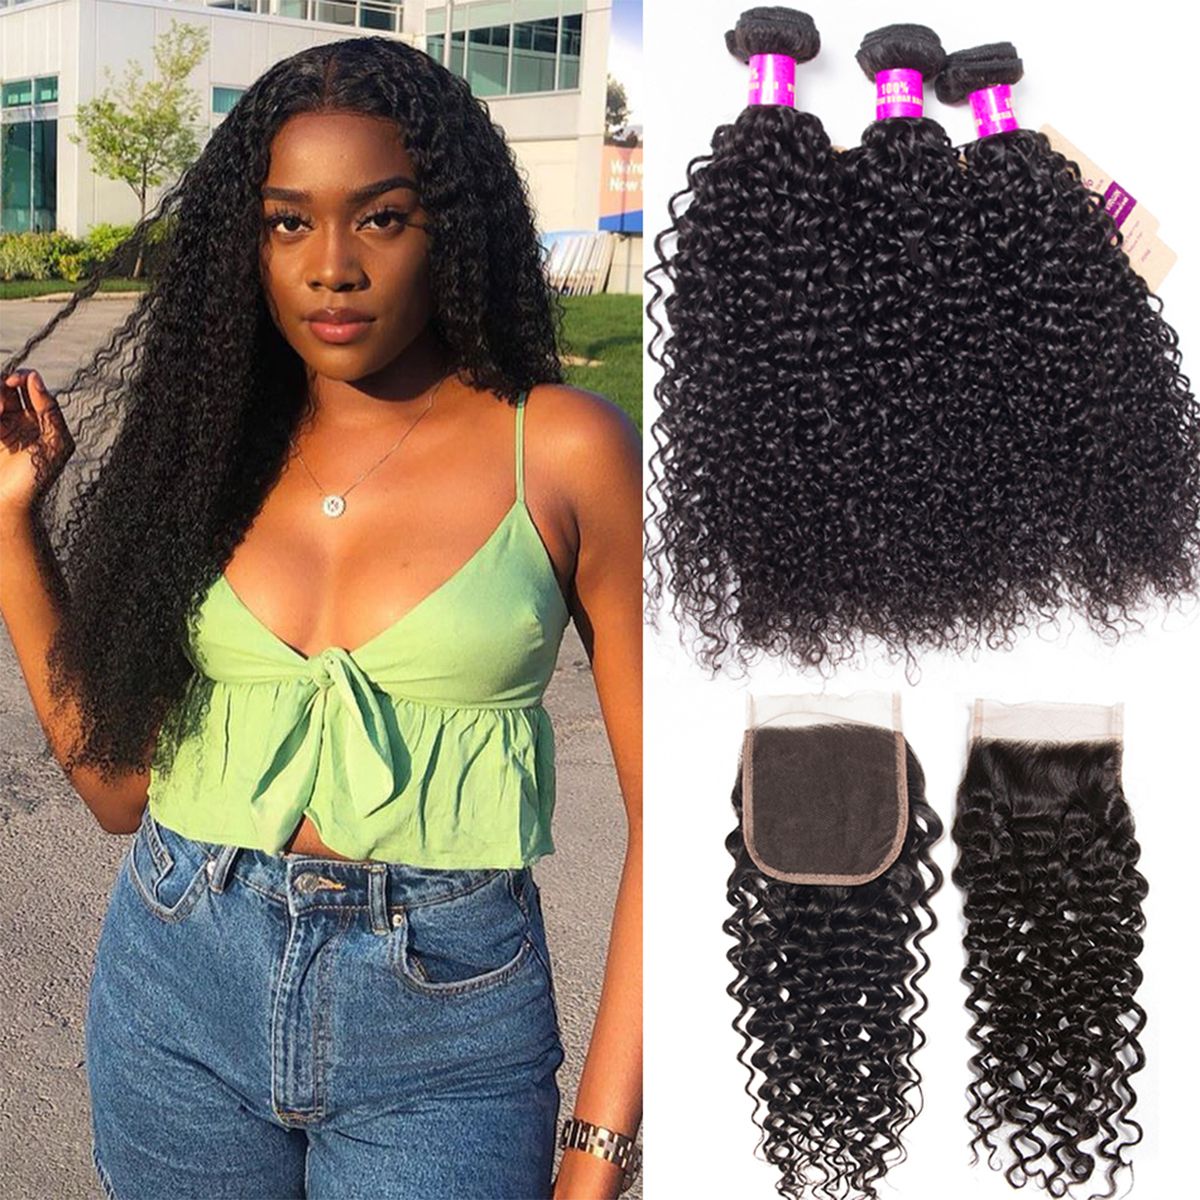 Peruvian Curly Human Hair Weft With Closure 100% Virgin Human Hair 3 Bundles With Closure Best Curly